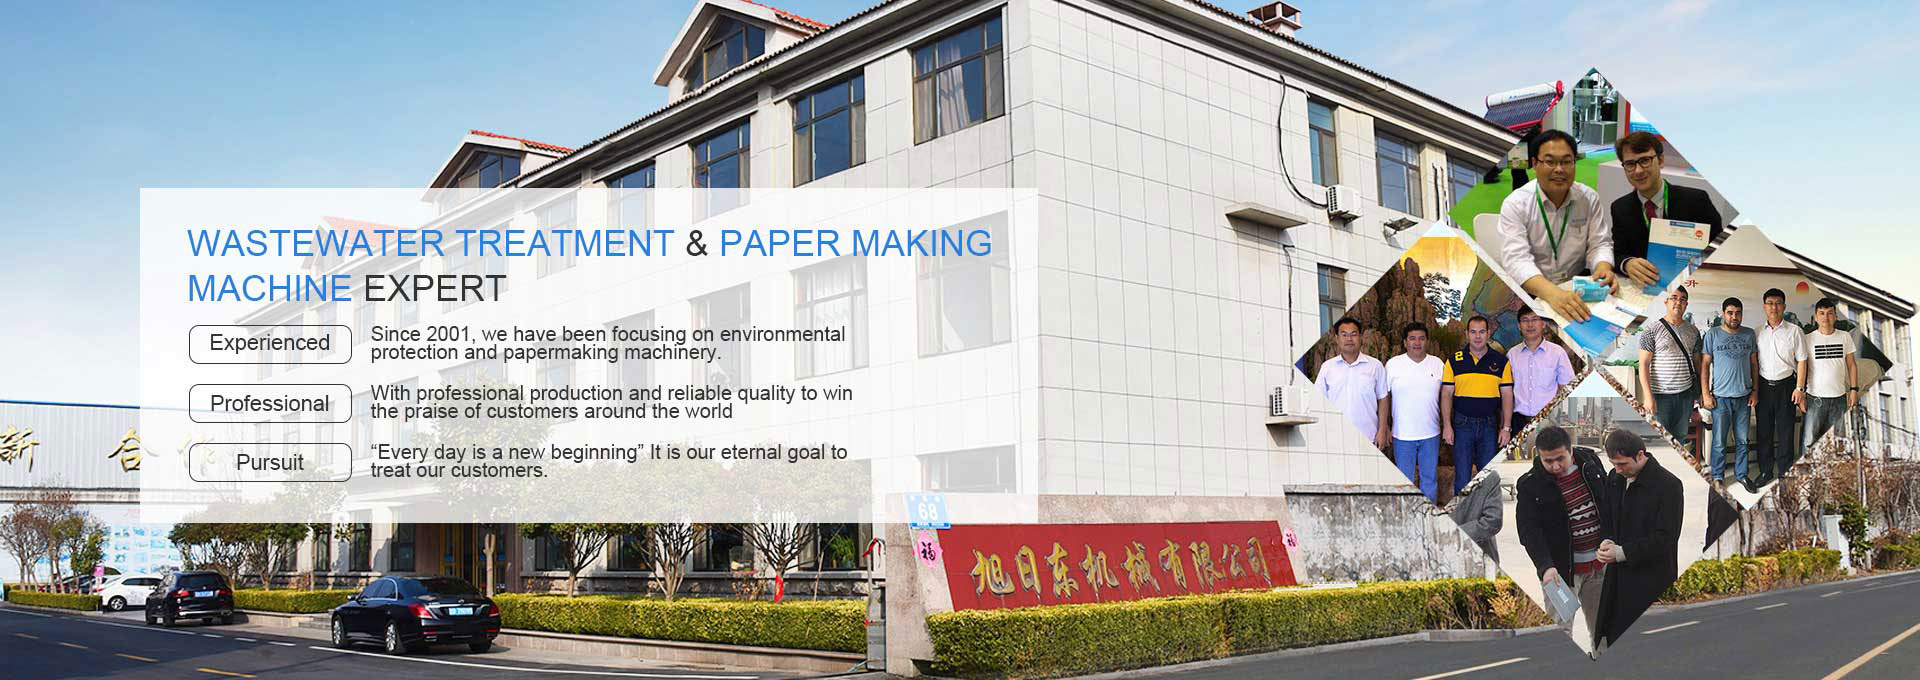 wastewater treatment at paper making equipment equipment